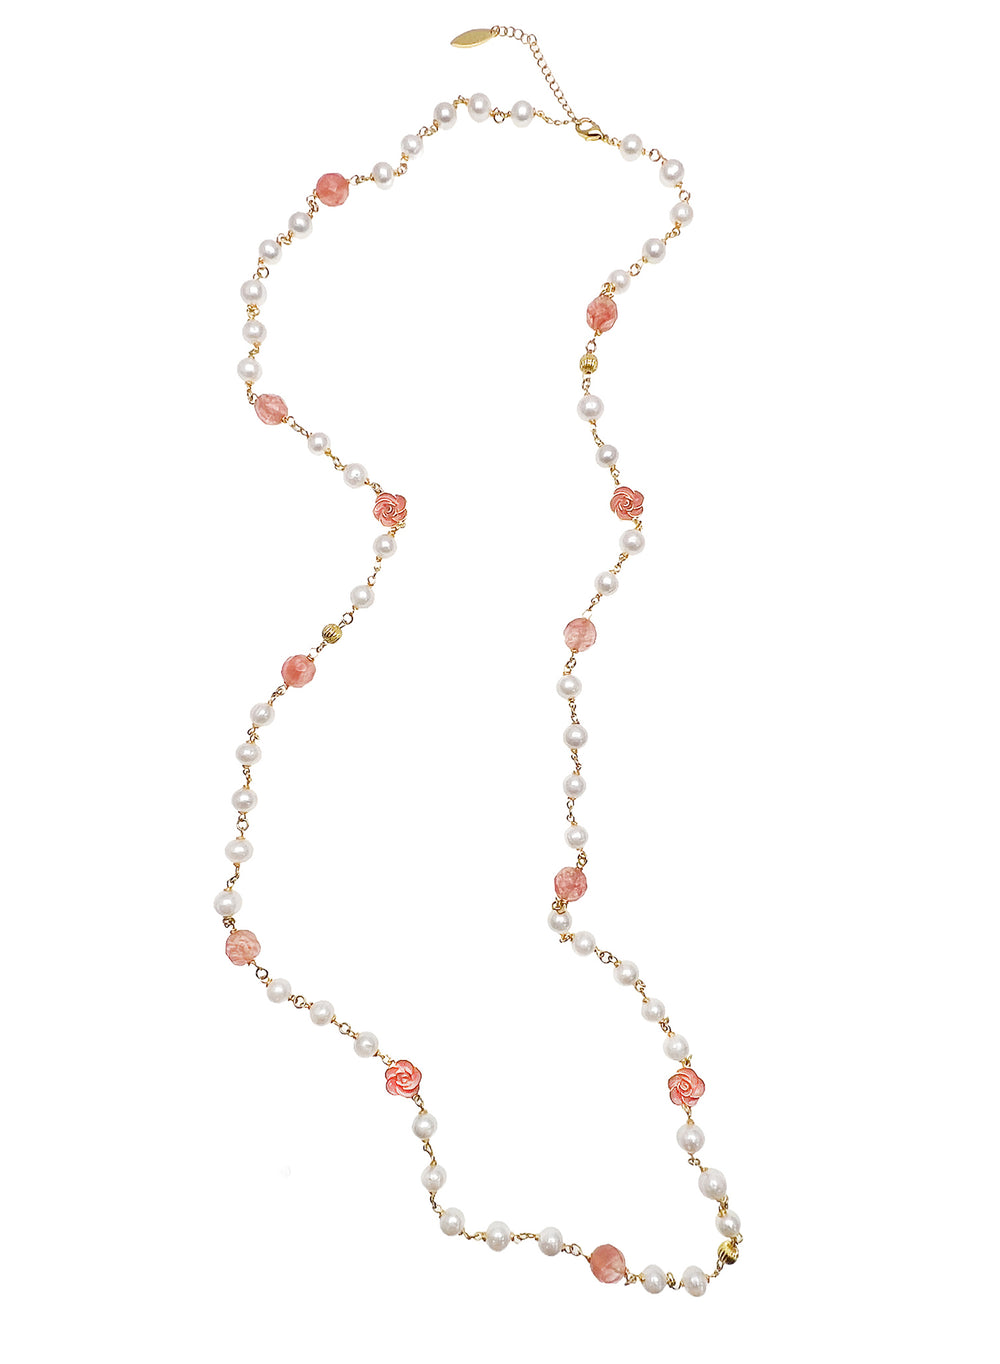 Freshwater Pearls And Pink Watermelon Quartz With Rose Charms Long Necklace LN006 - FARRA